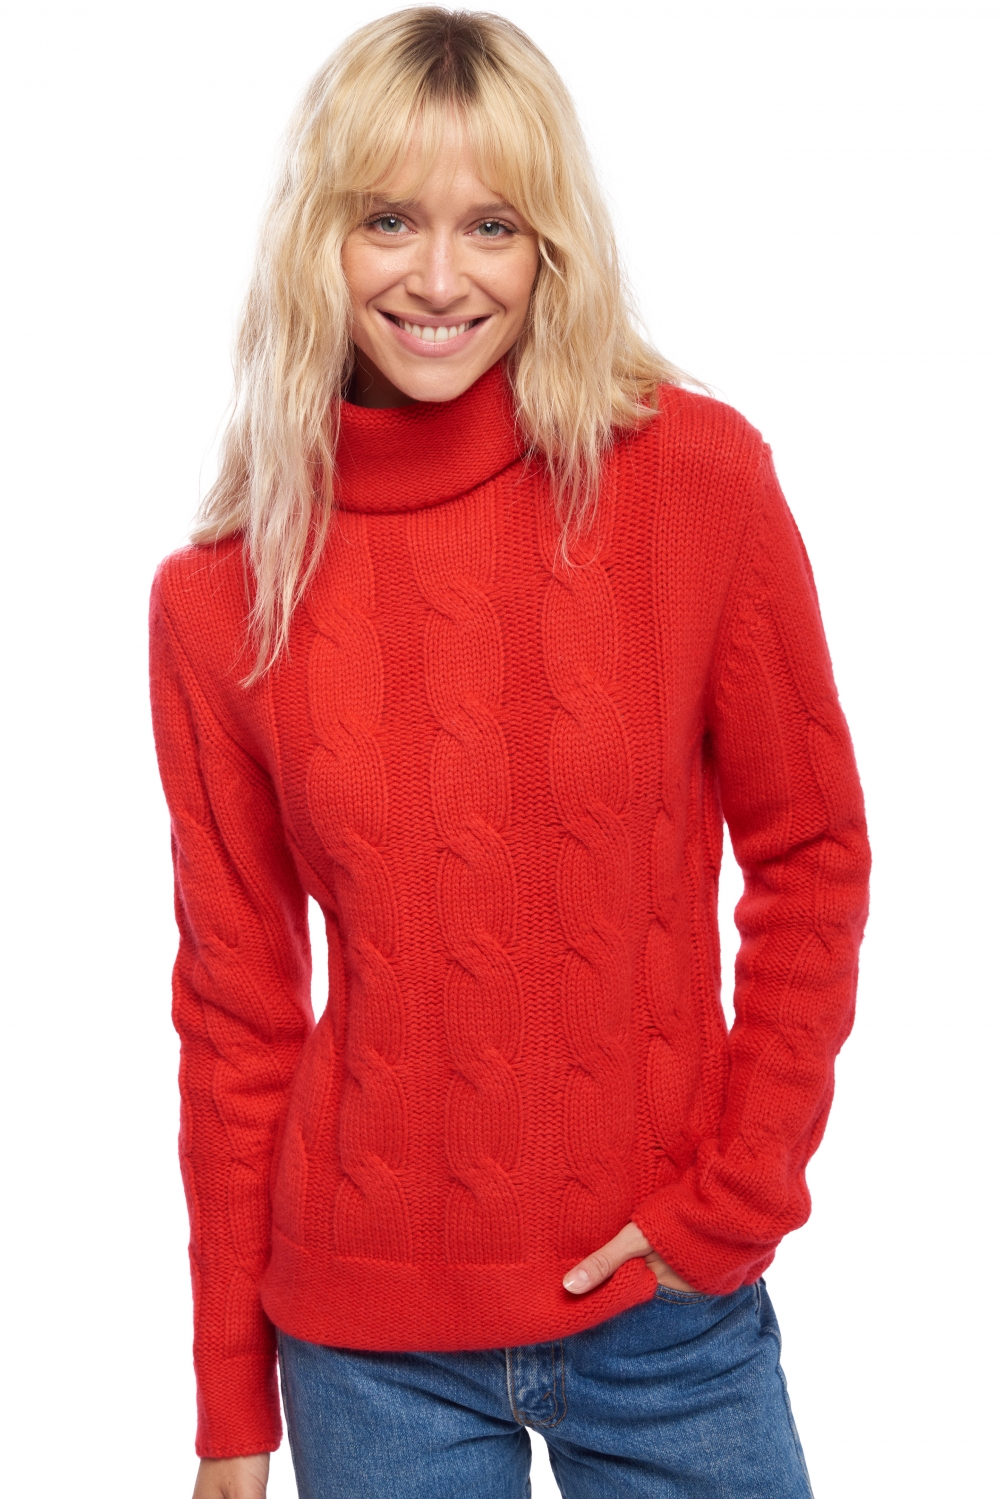 Cachemire pull femme blanche rouge 4xl